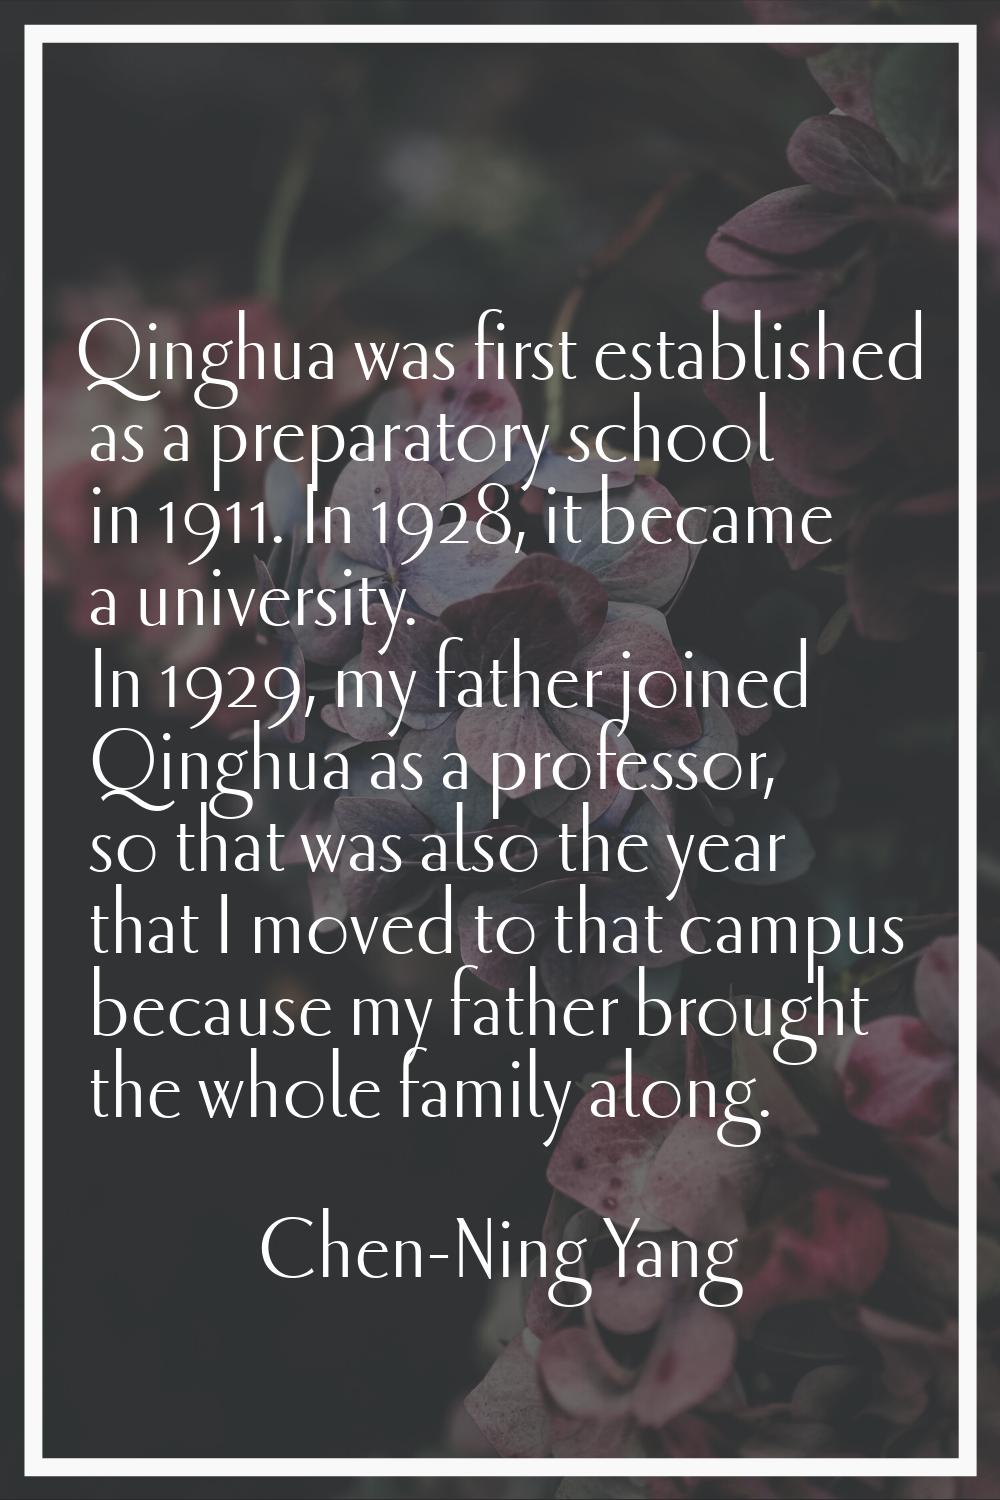 Qinghua was first established as a preparatory school in 1911. In 1928, it became a university. In 